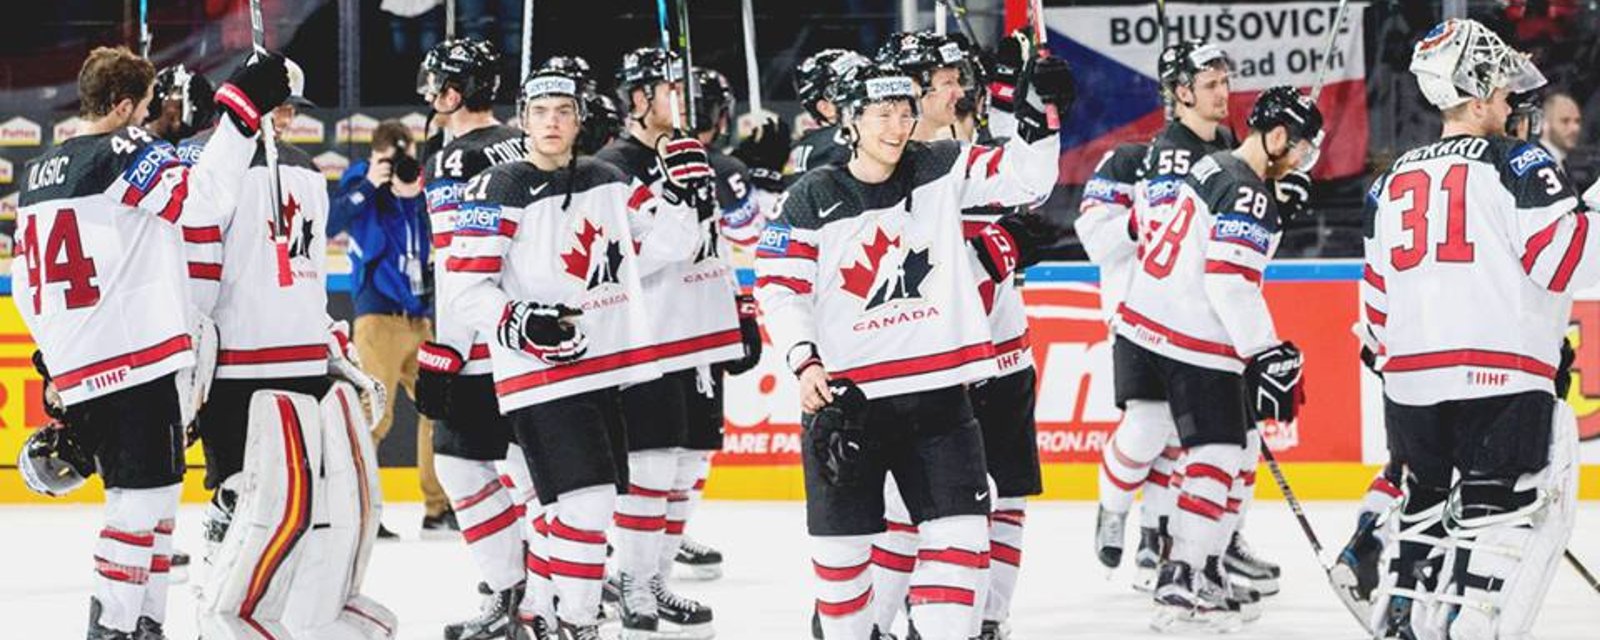 REPORT: Nice gesture from Team Canada!